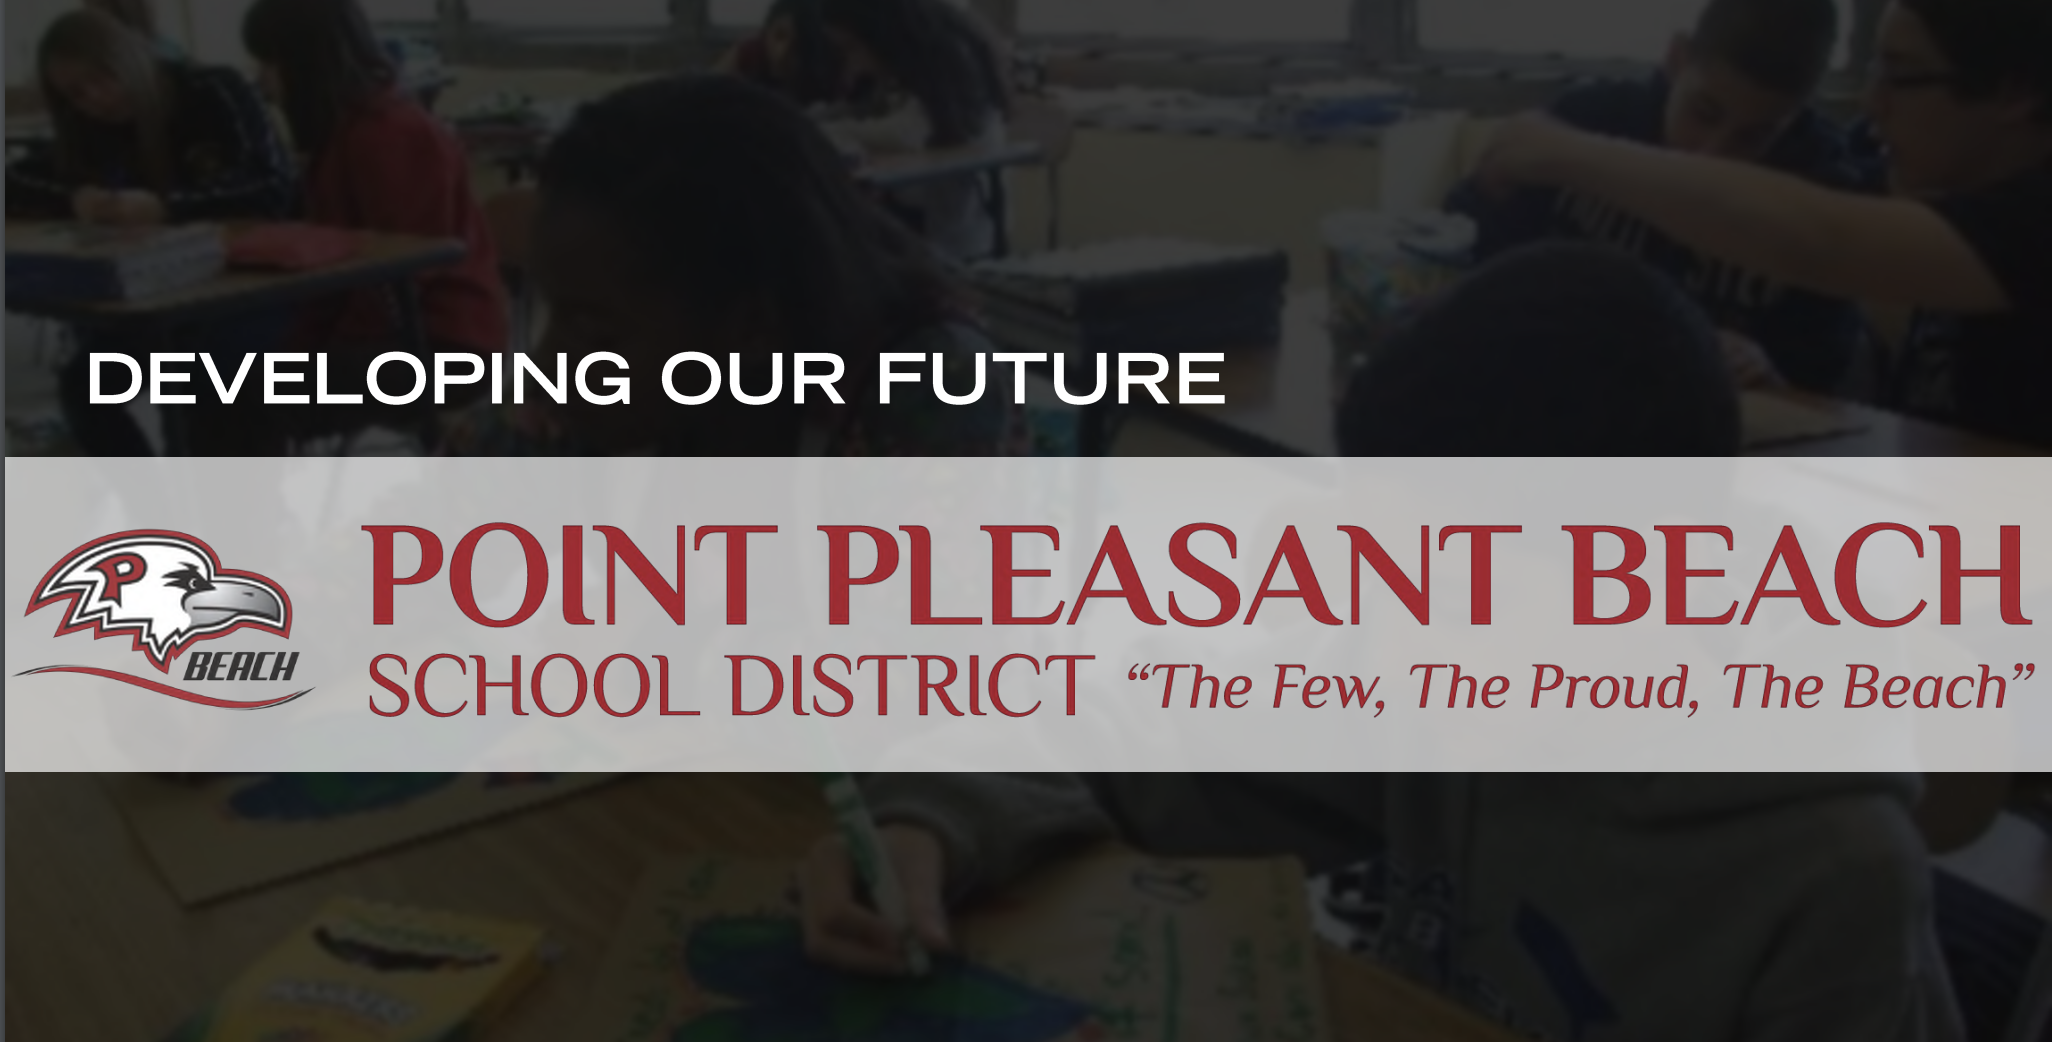 Point Pleasant Beach developing our future, background image of a classroom